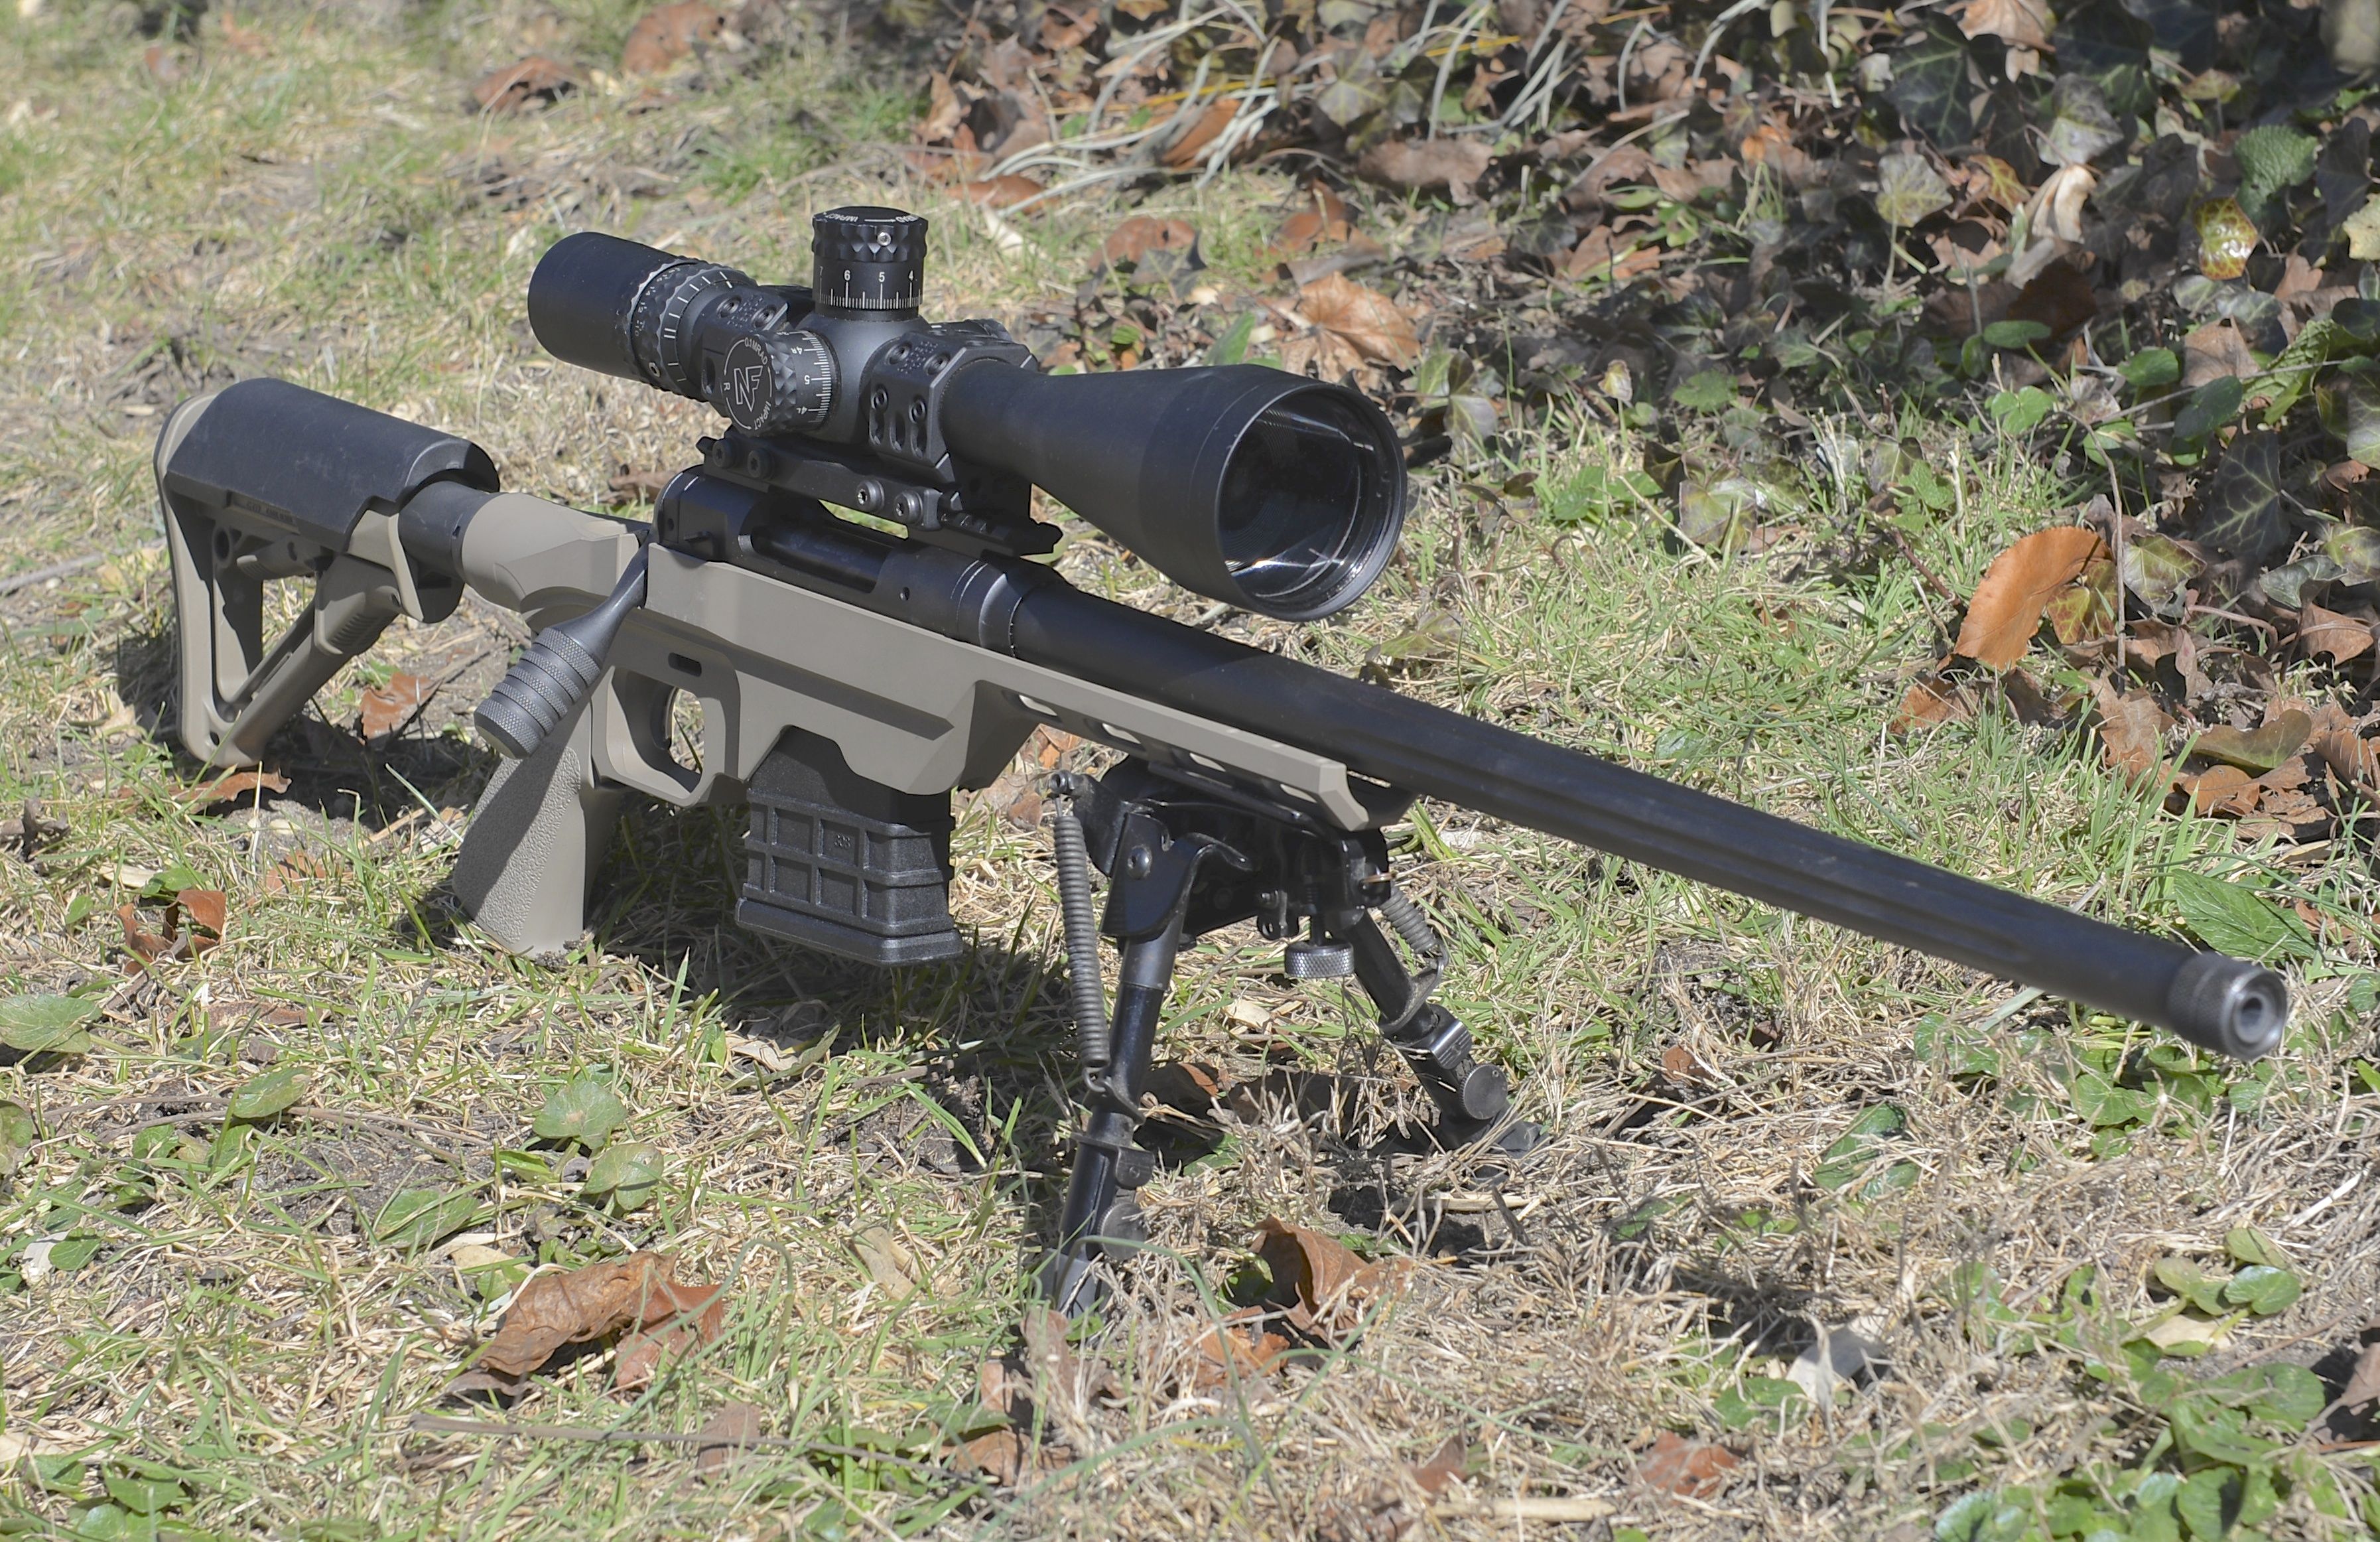 savage-model-10-fcp-sr-review-rifleshooter